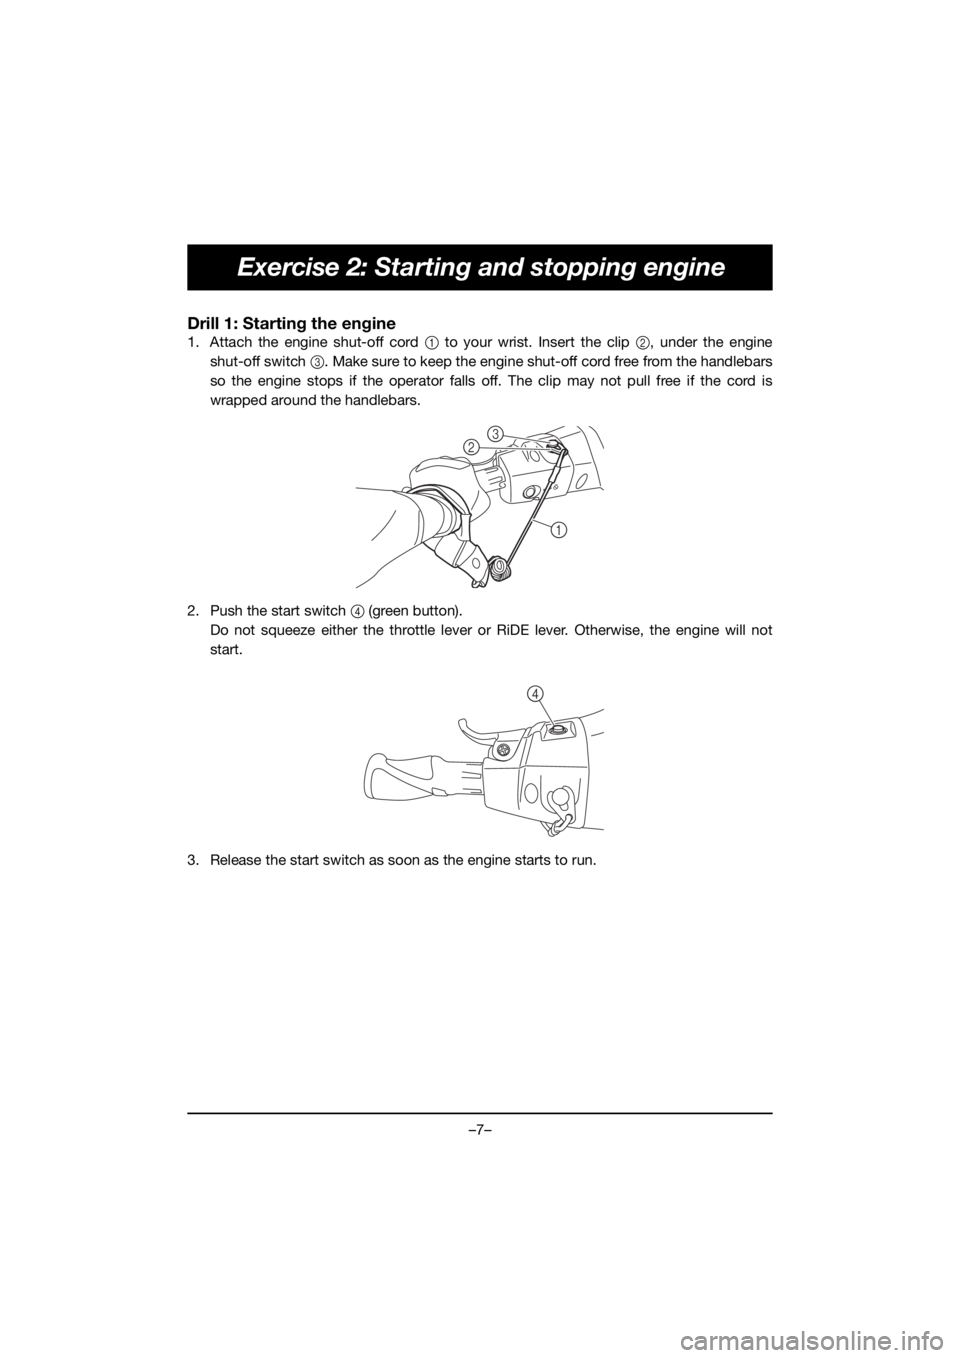 YAMAHA FJR1300 2019  ΟΔΗΓΌΣ ΧΡΉΣΗΣ (in Greek) –7–
Exercise 2: Starting and stopping engine
Drill 1: Starting the engine
1. Attach the engine shut-off cord 1 to your wrist. Insert the clip 2, under the engine
shut-off switch 3. Make sure to ke